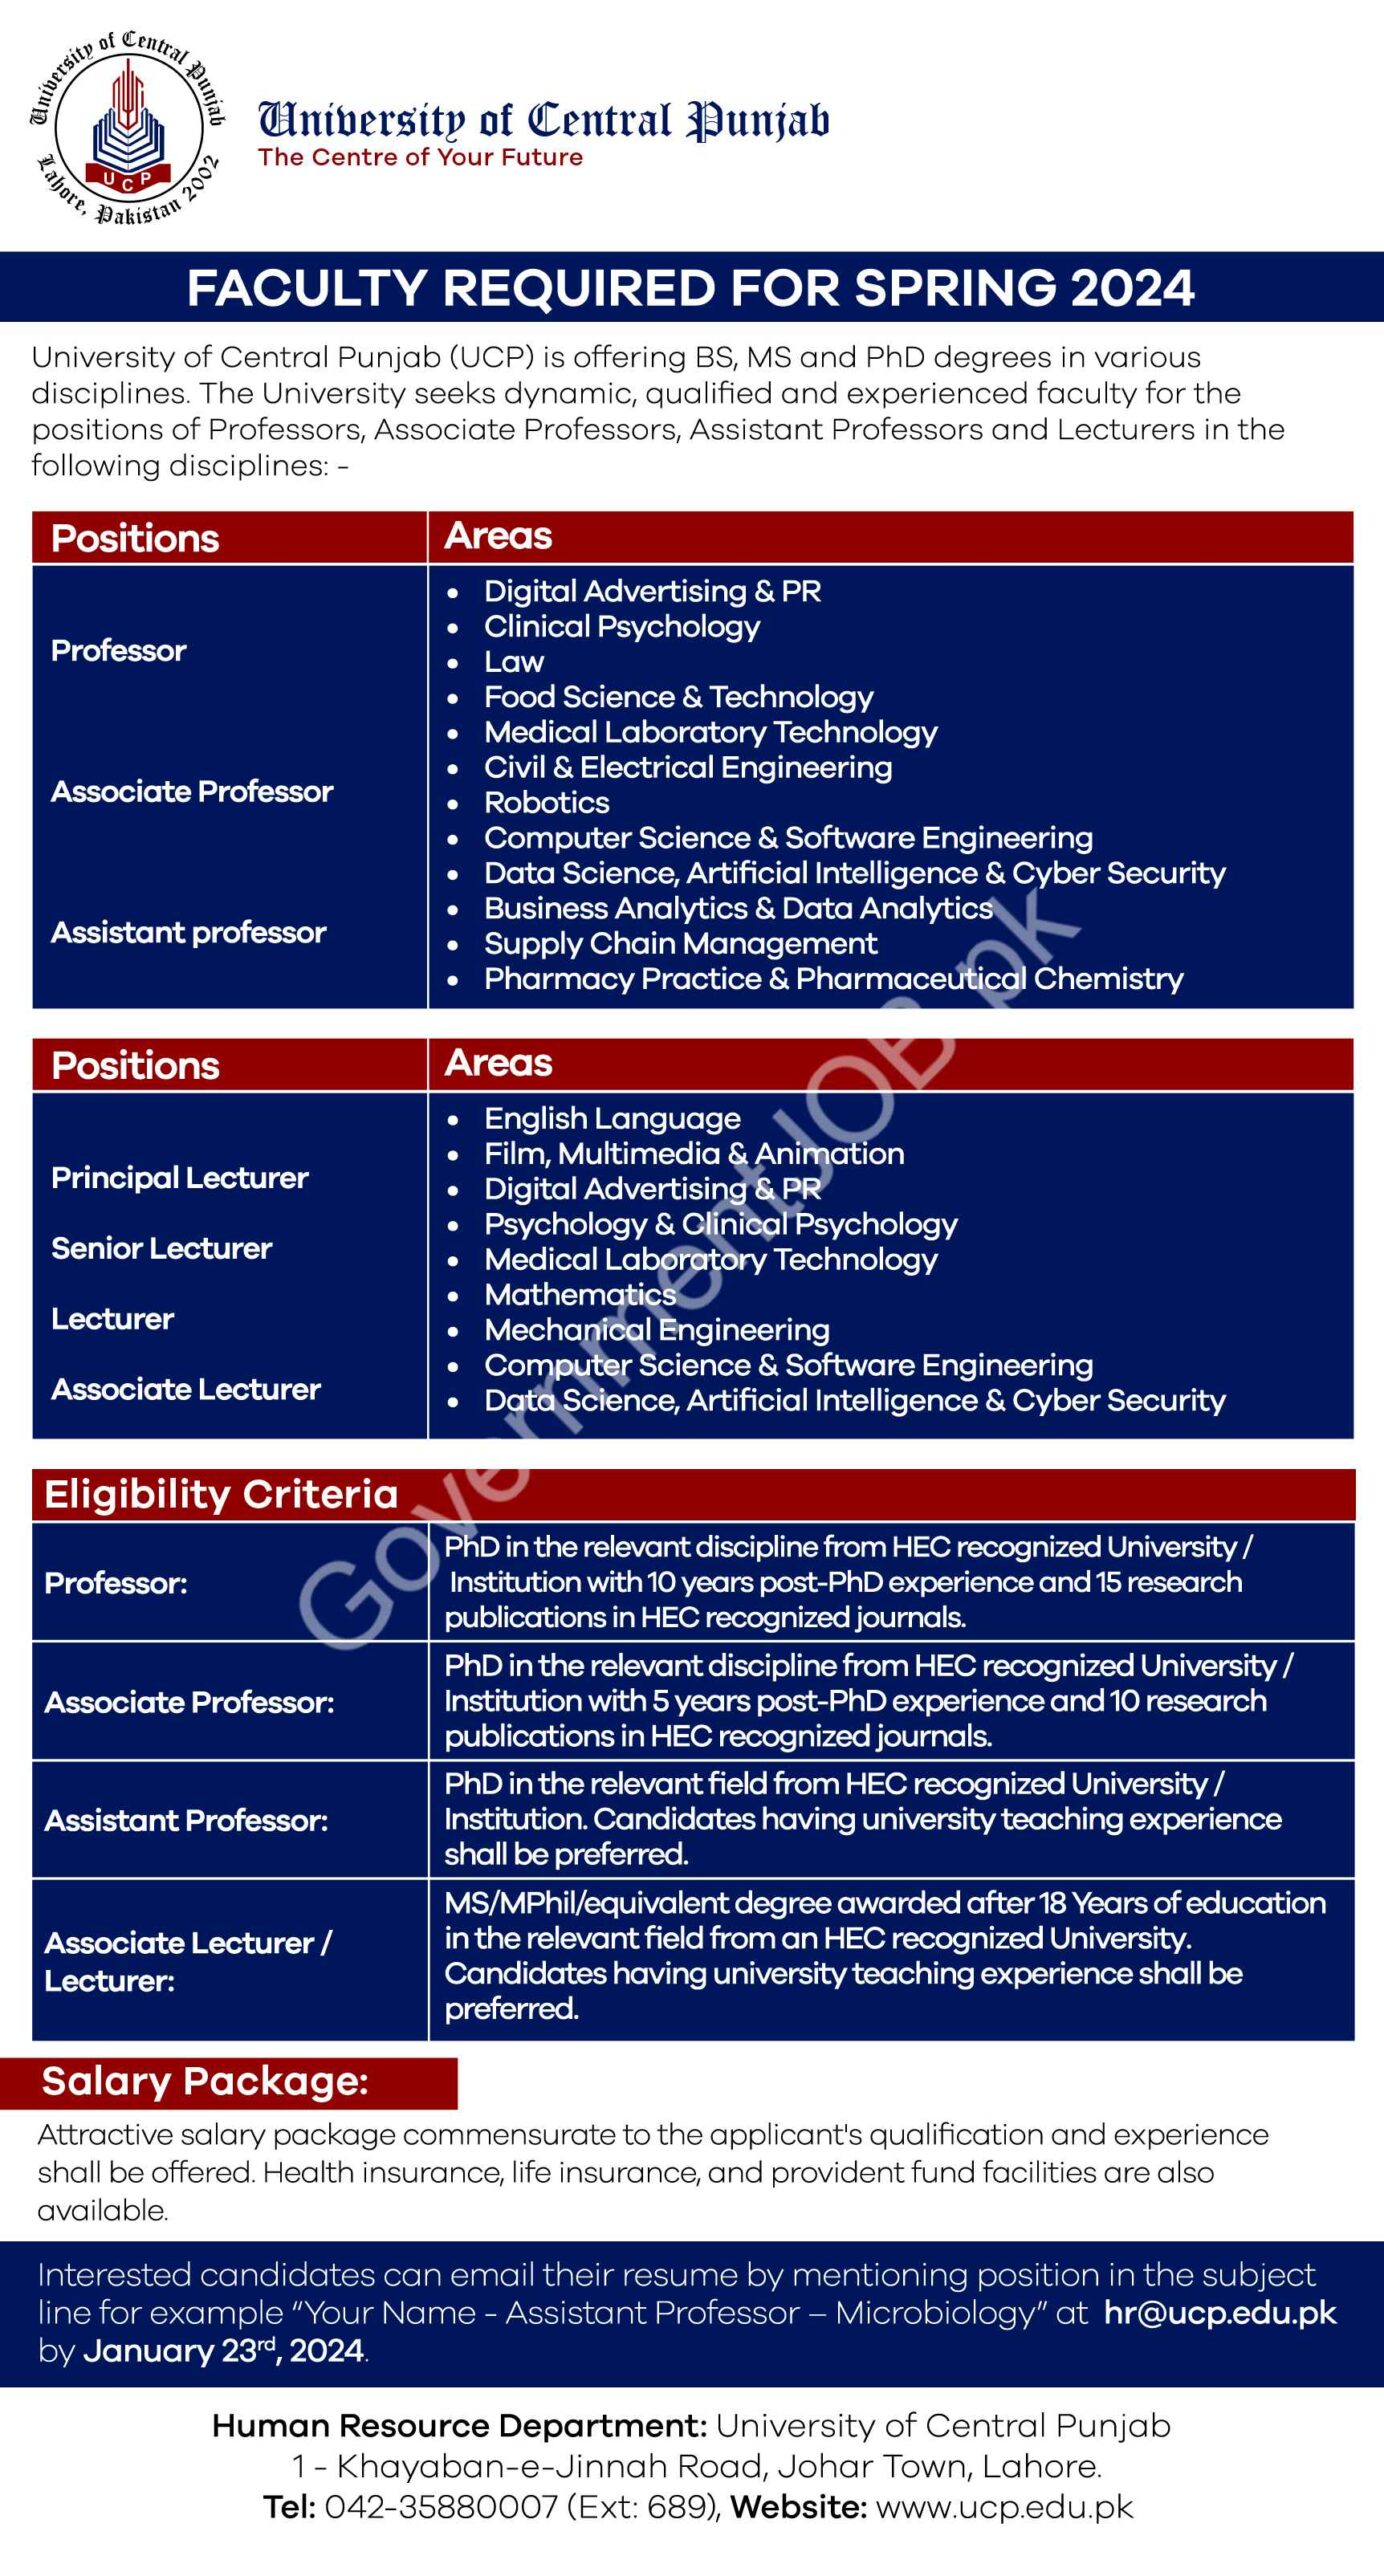 University of Central Punjab Jobs 2024 | UCP Careers
